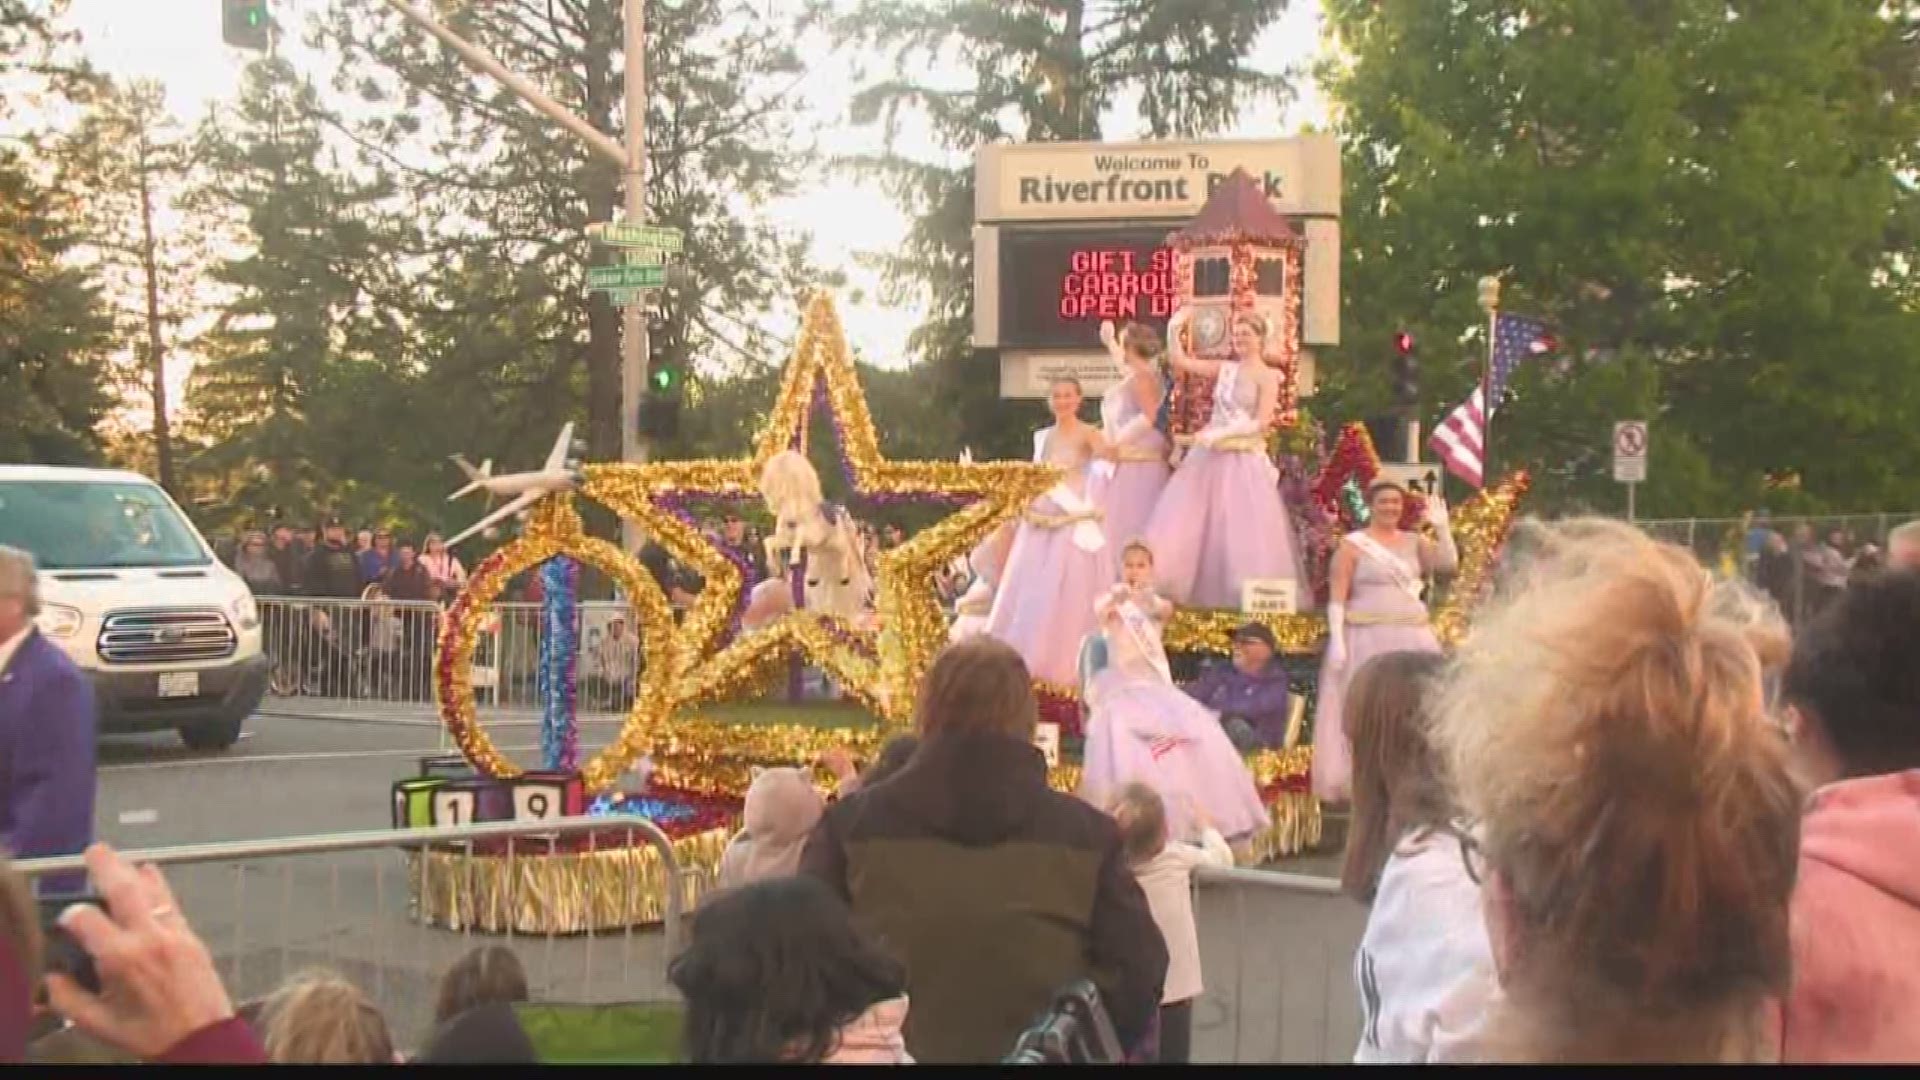 KREM Photojournalist caught the sights and the sounds of the Spokane Lilac Parade, which marched on despite rain and flooding over the weekend.